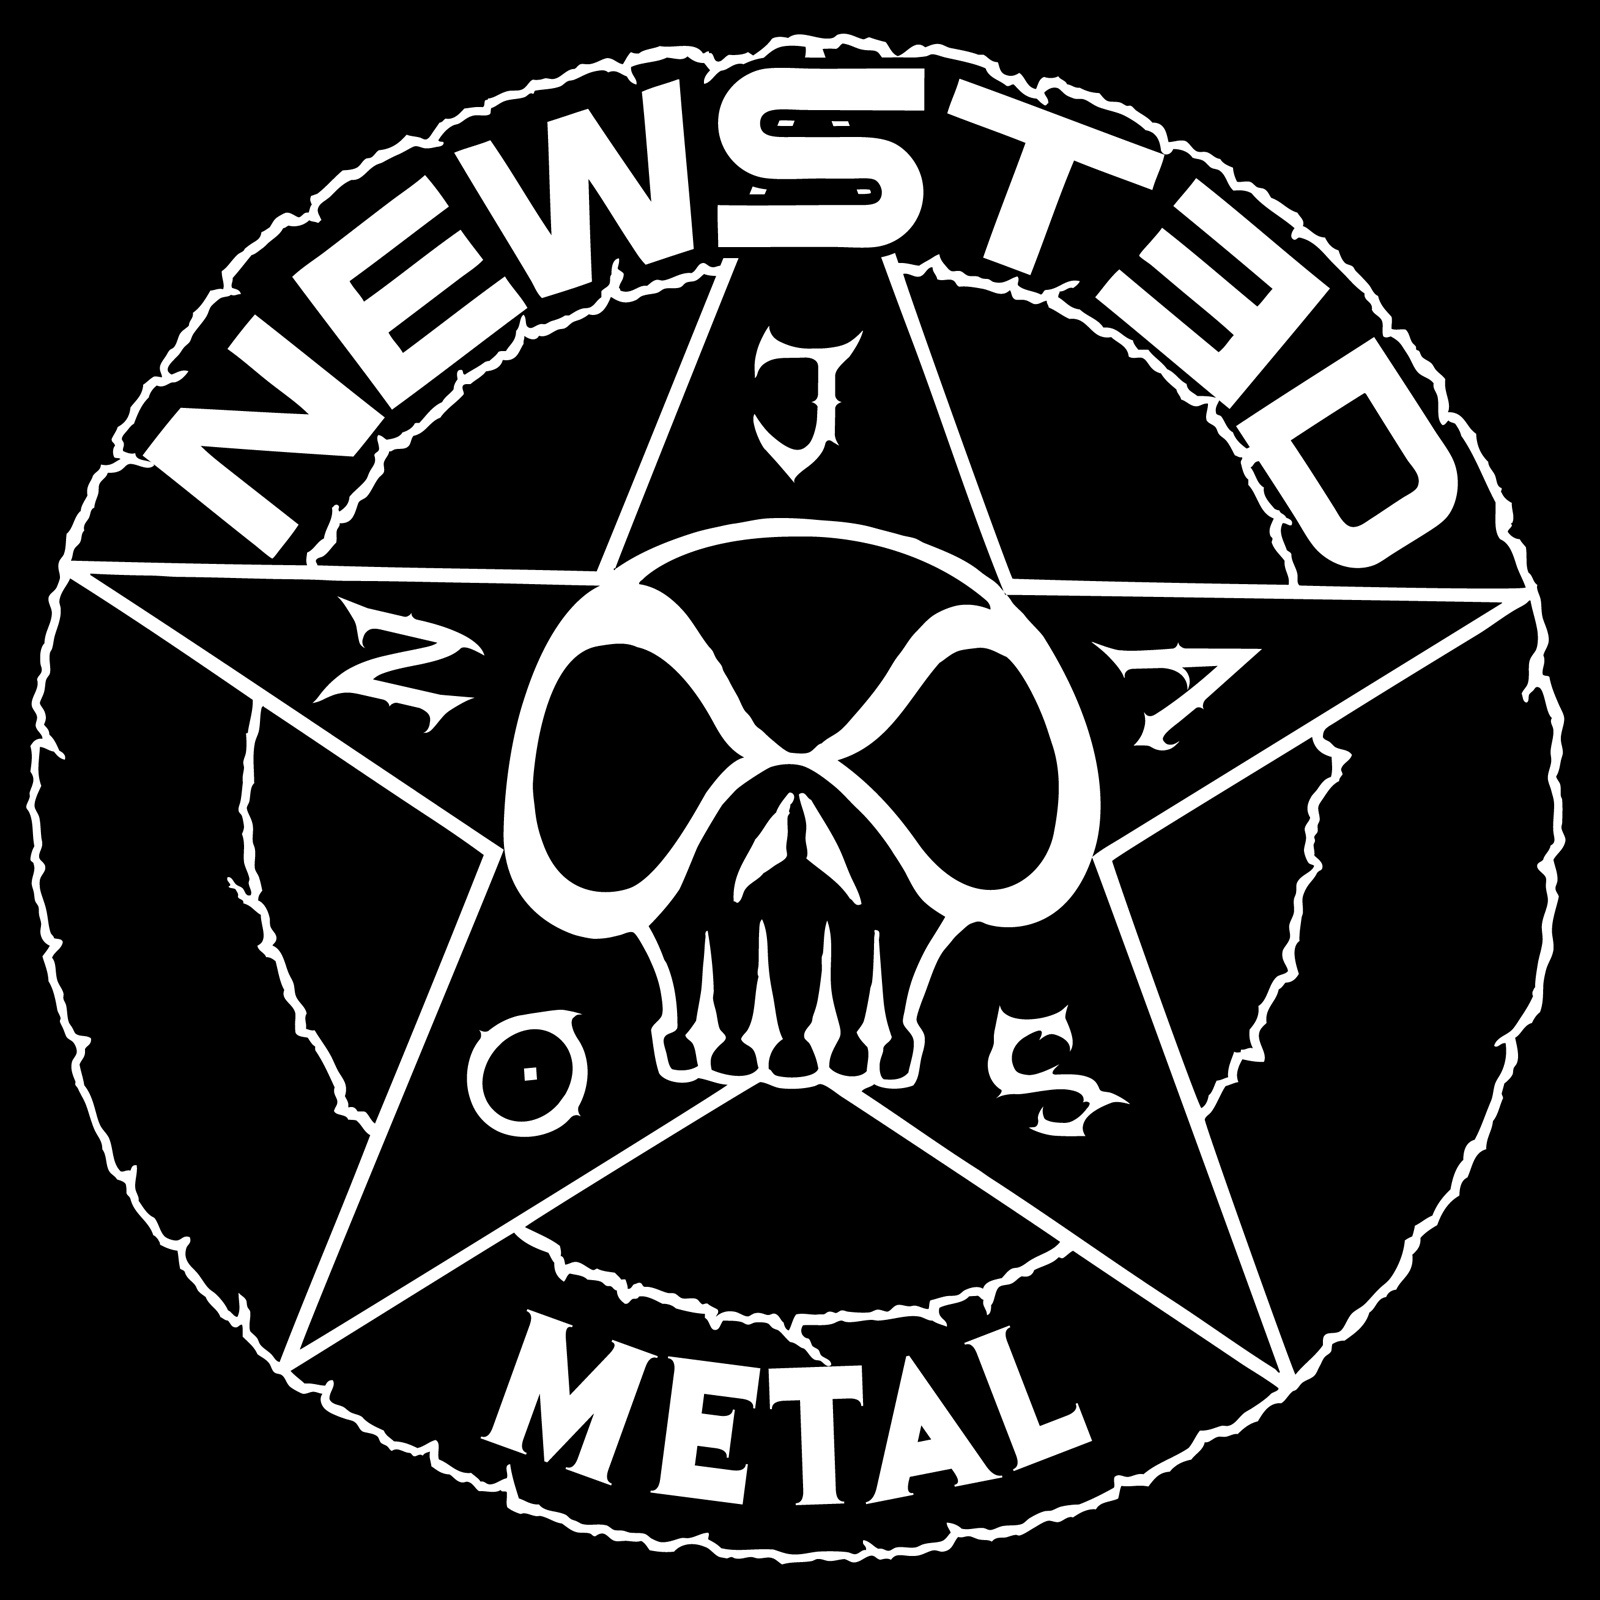 Newsted - Metal EP